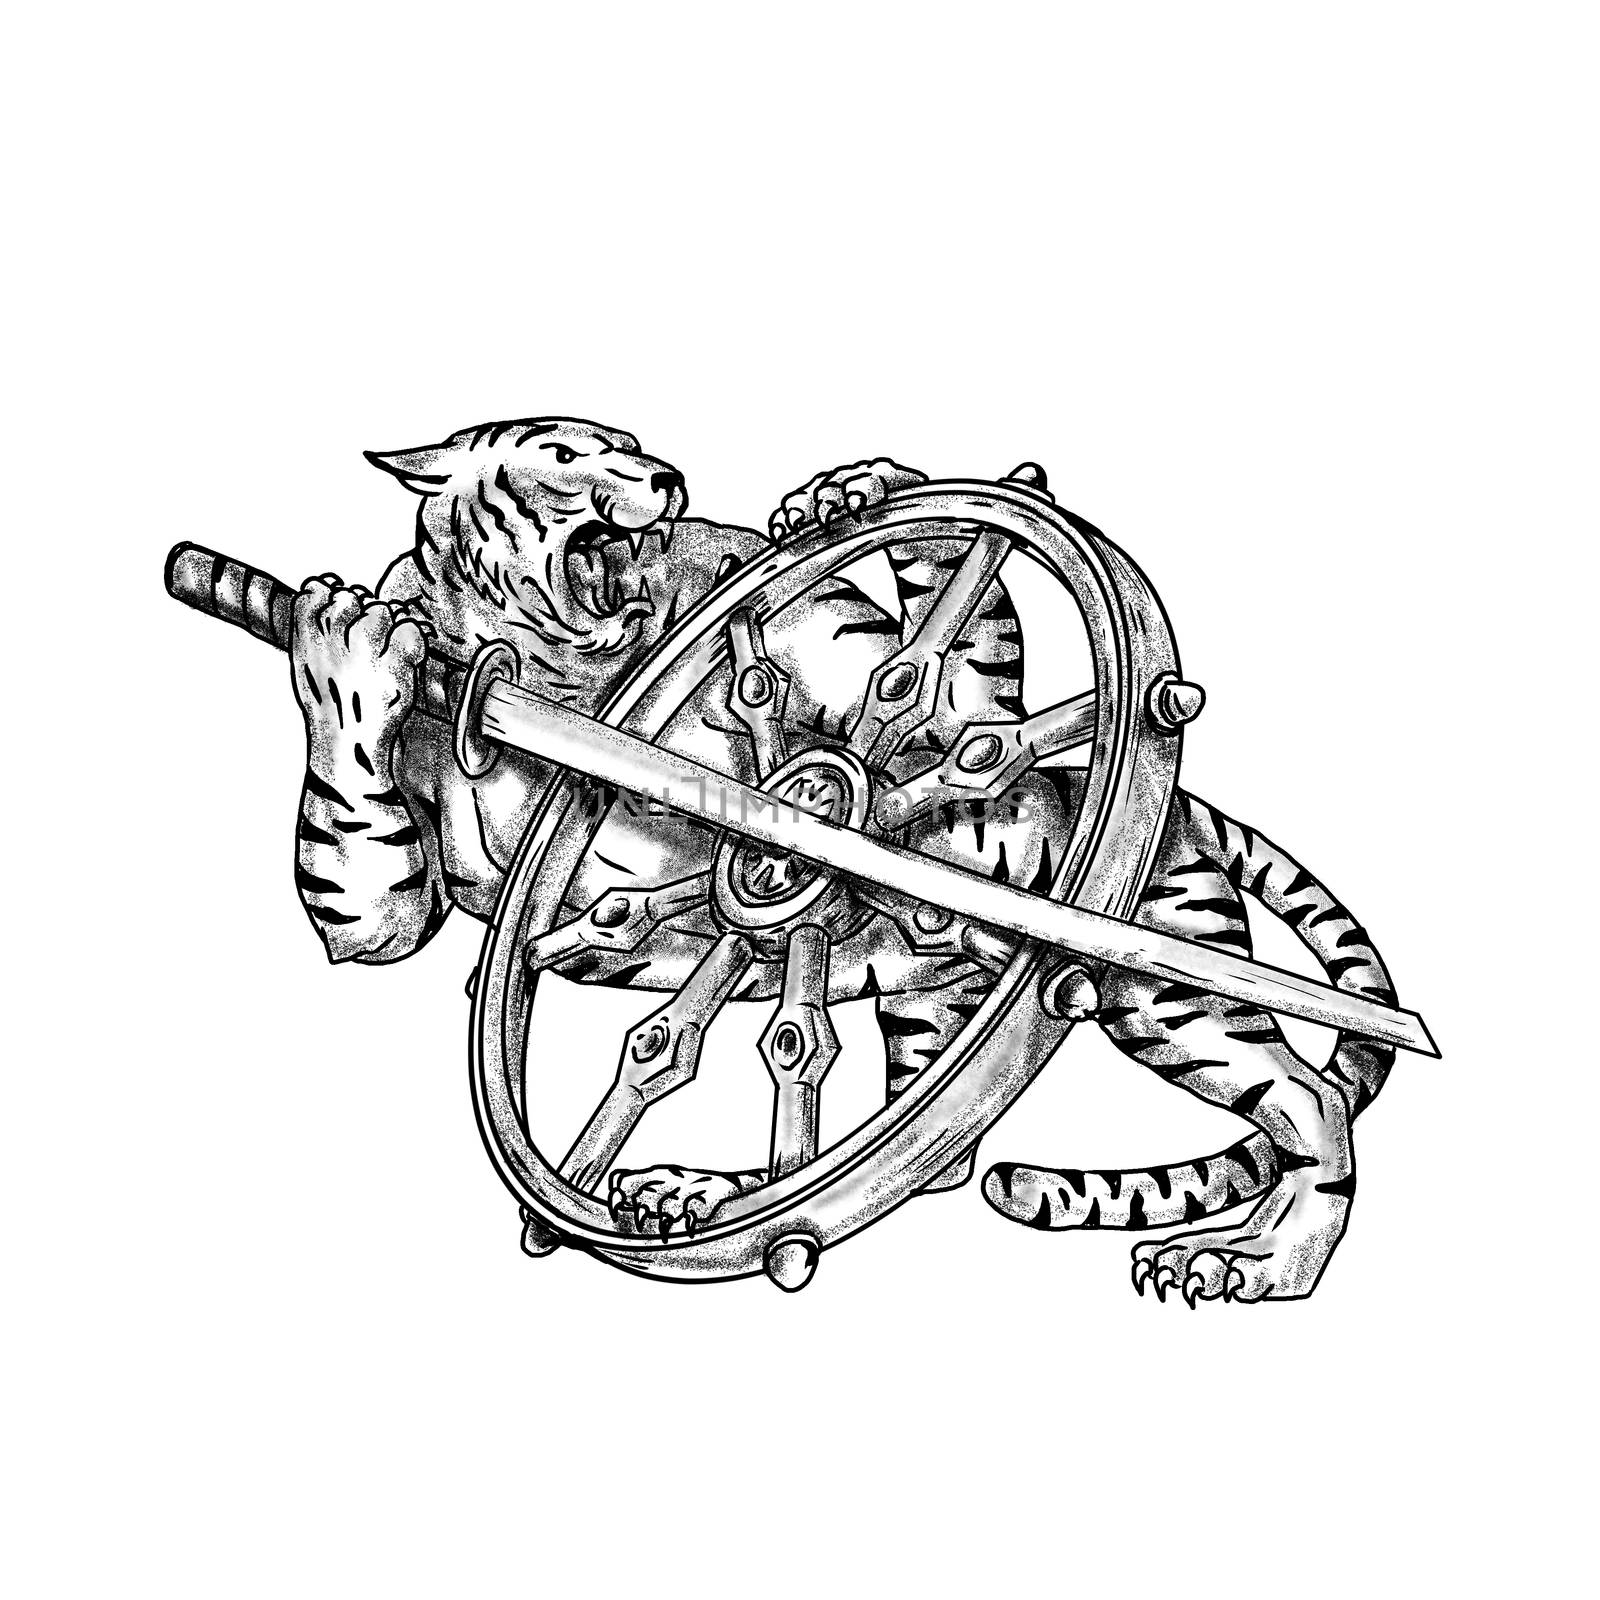 Tattoo style illustration of a Tiger With Katana Samurai Sword and Dharma Wheel done in hand sketch drawing Tattoo style.
